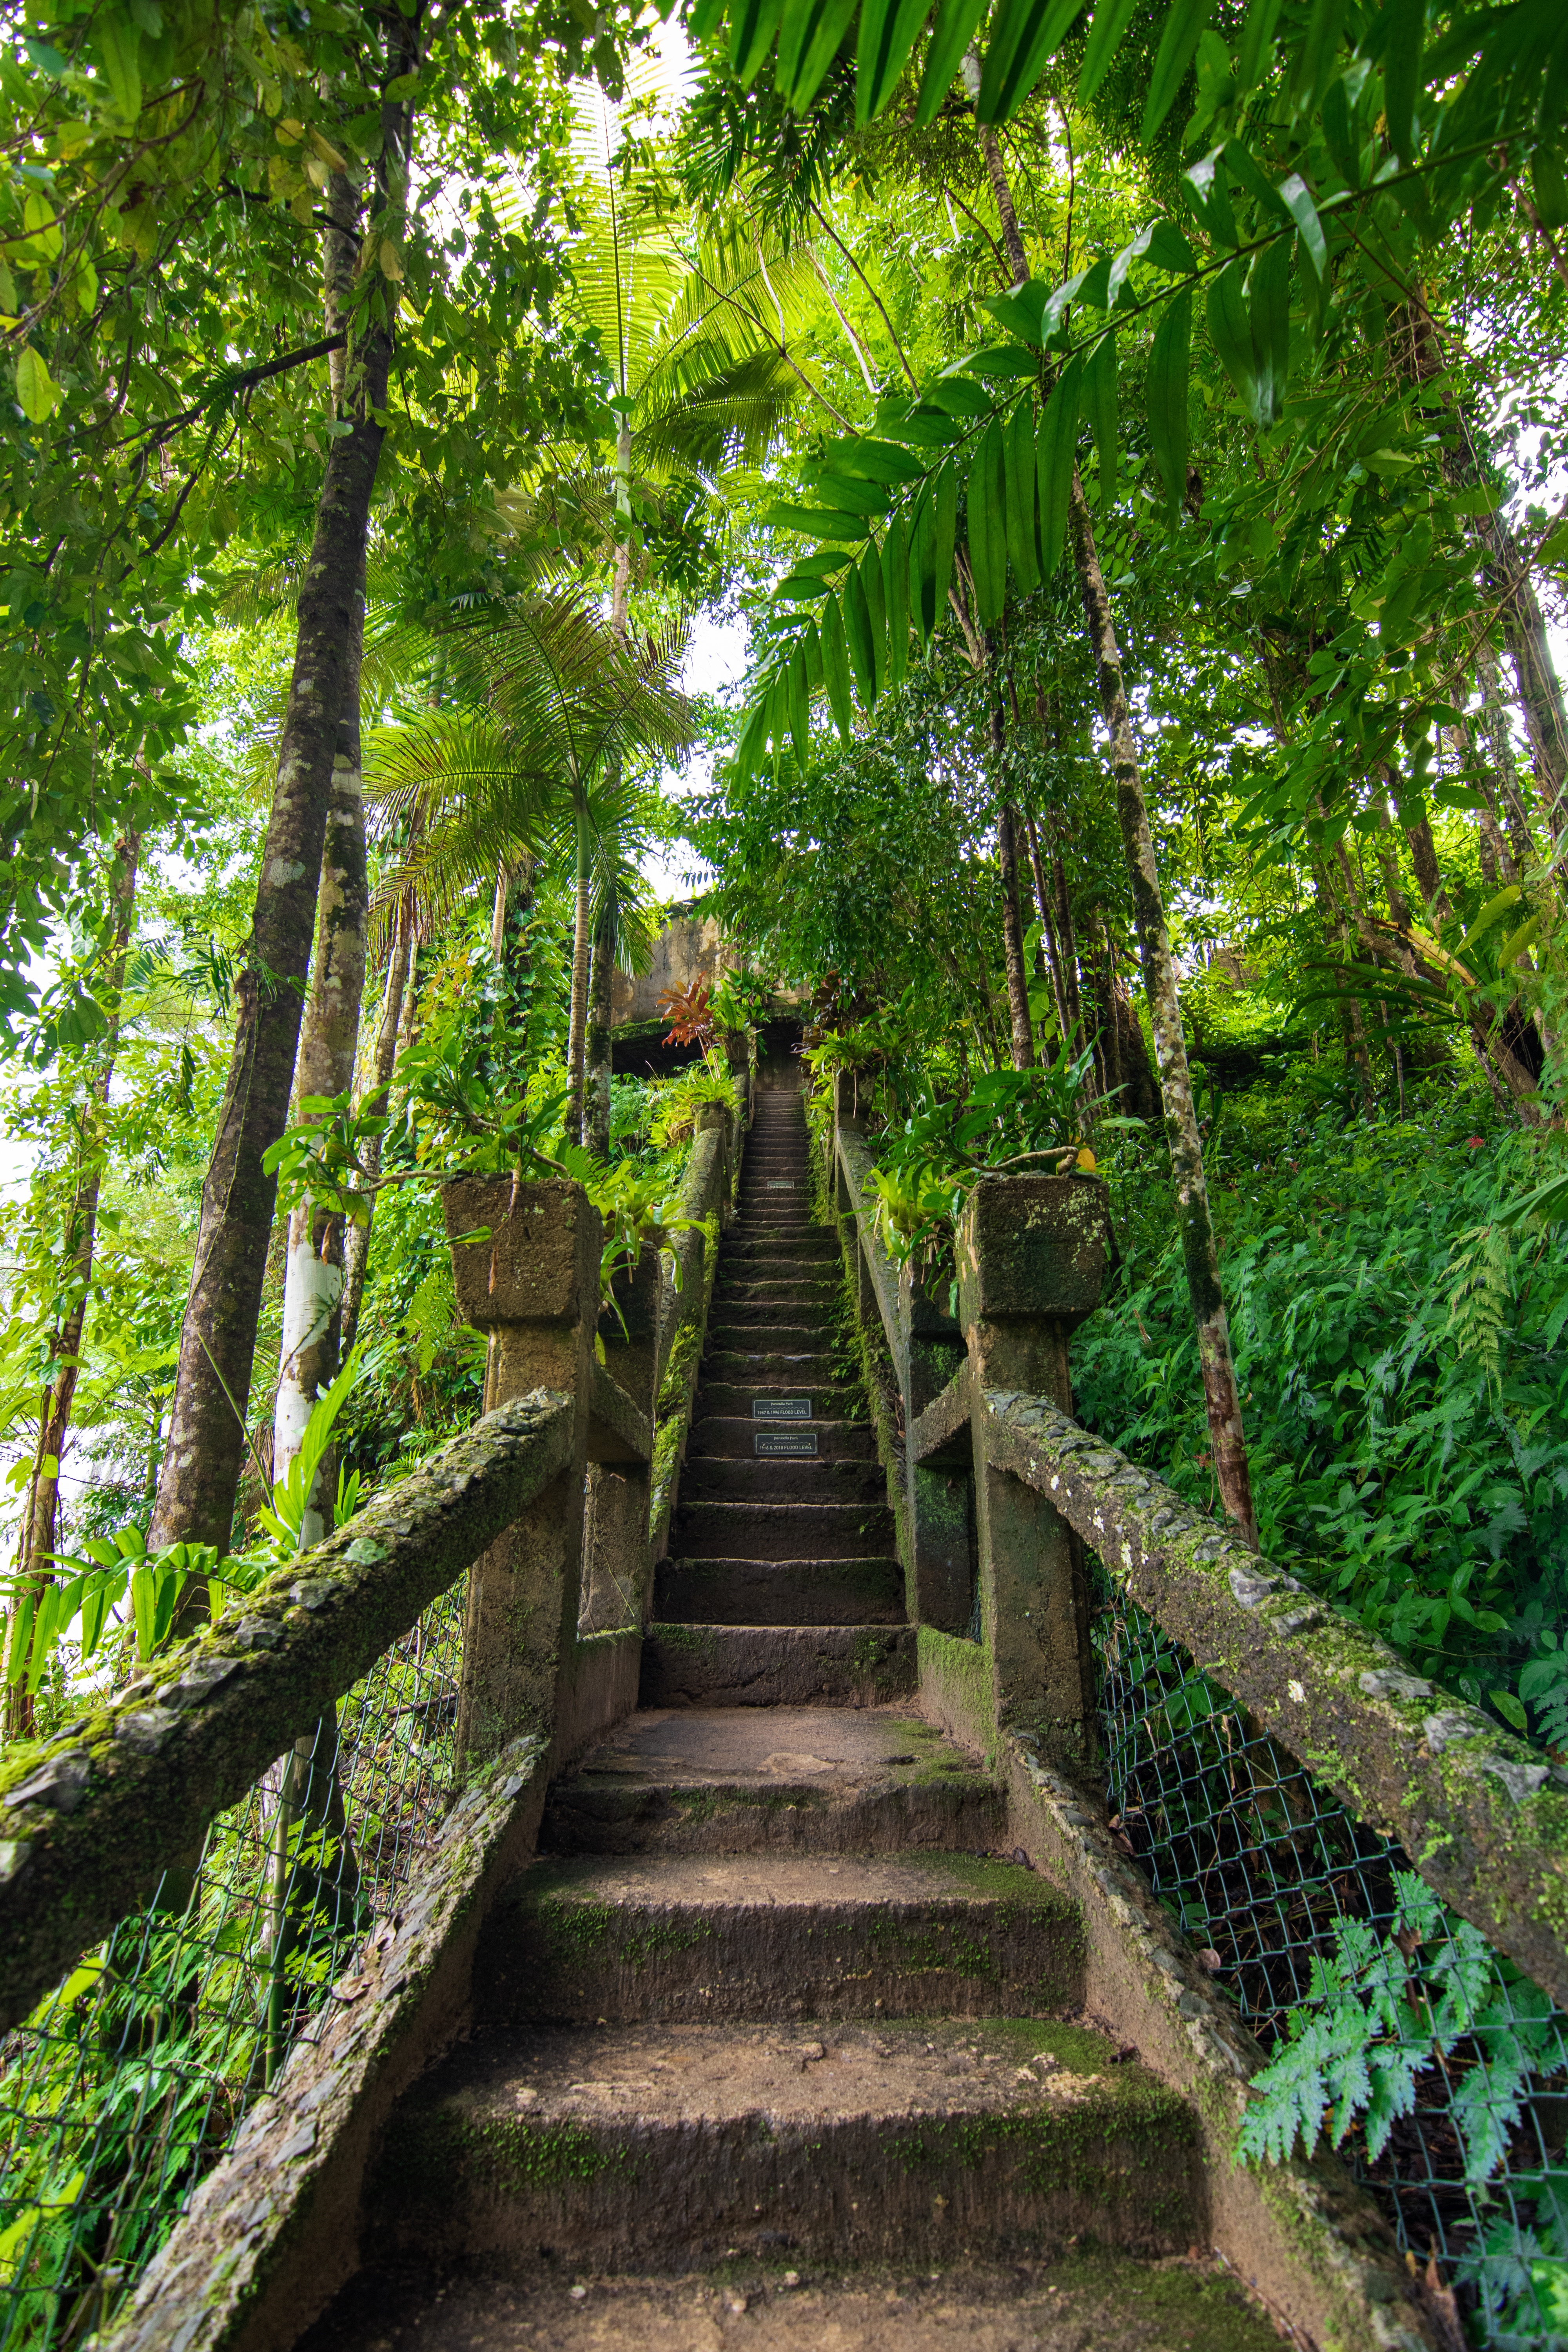 The Grand Staircase at Paronella Park in the rainforest